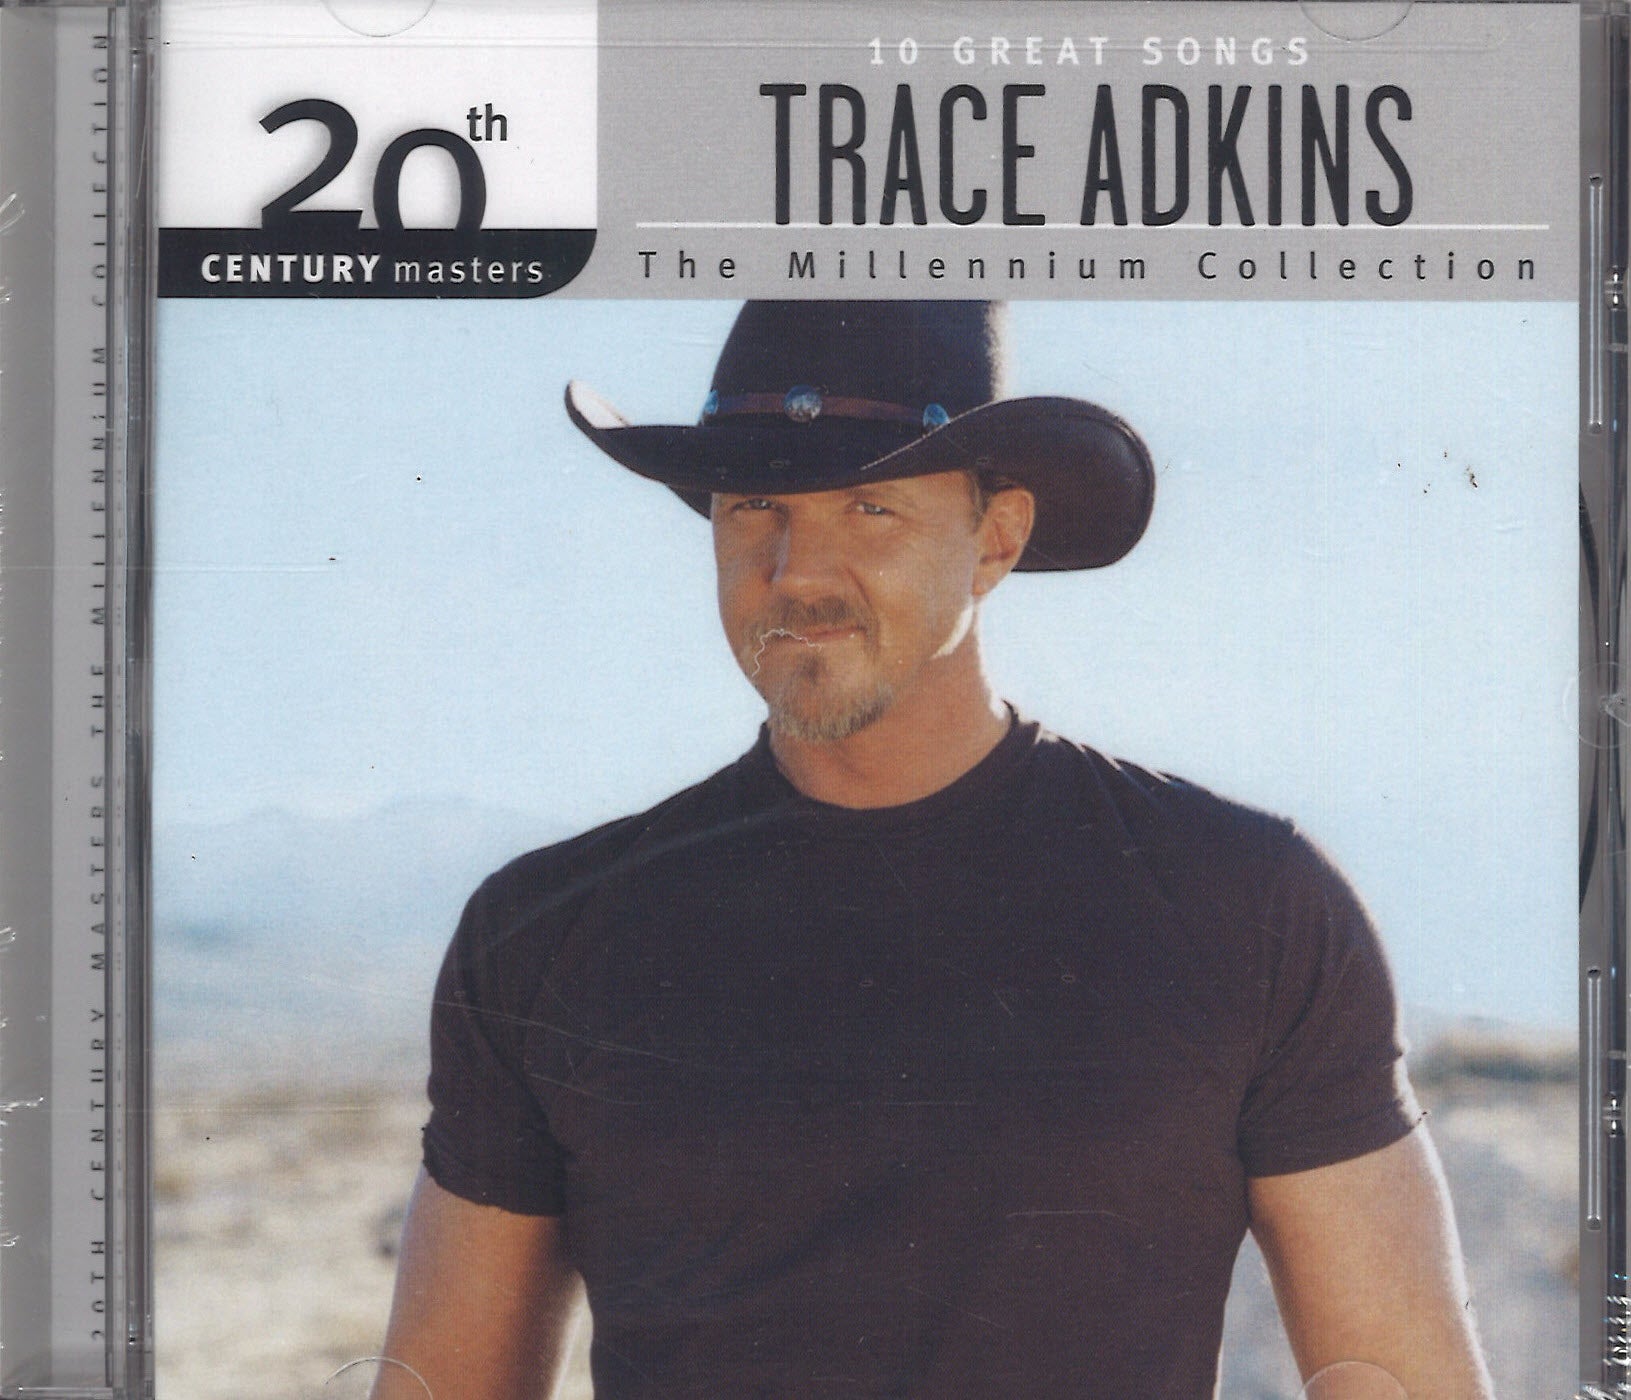 Trace Adkins The Millennium Collection